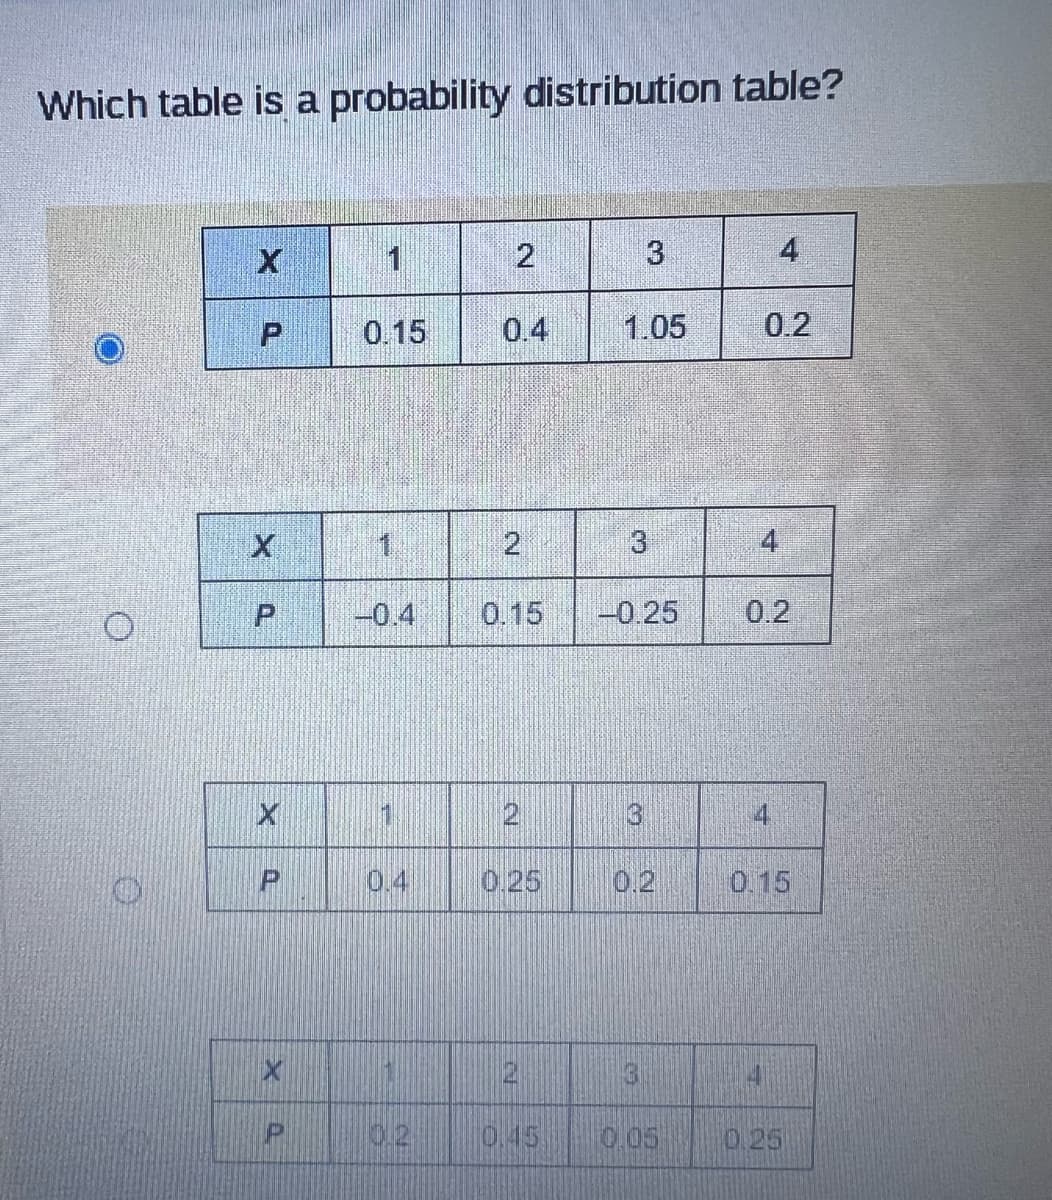 Which table is a probability distribution table?
0
X
X
P
X
P
X
P
1
0.15
1
11
0.4
H
10.2
2
0.4
2
2
0.25
10.45
1.05
3
3
Ⓡ
0.2
3
-0.25 0.2
0.05
4
0.2
4
4
4
0.15
0.25